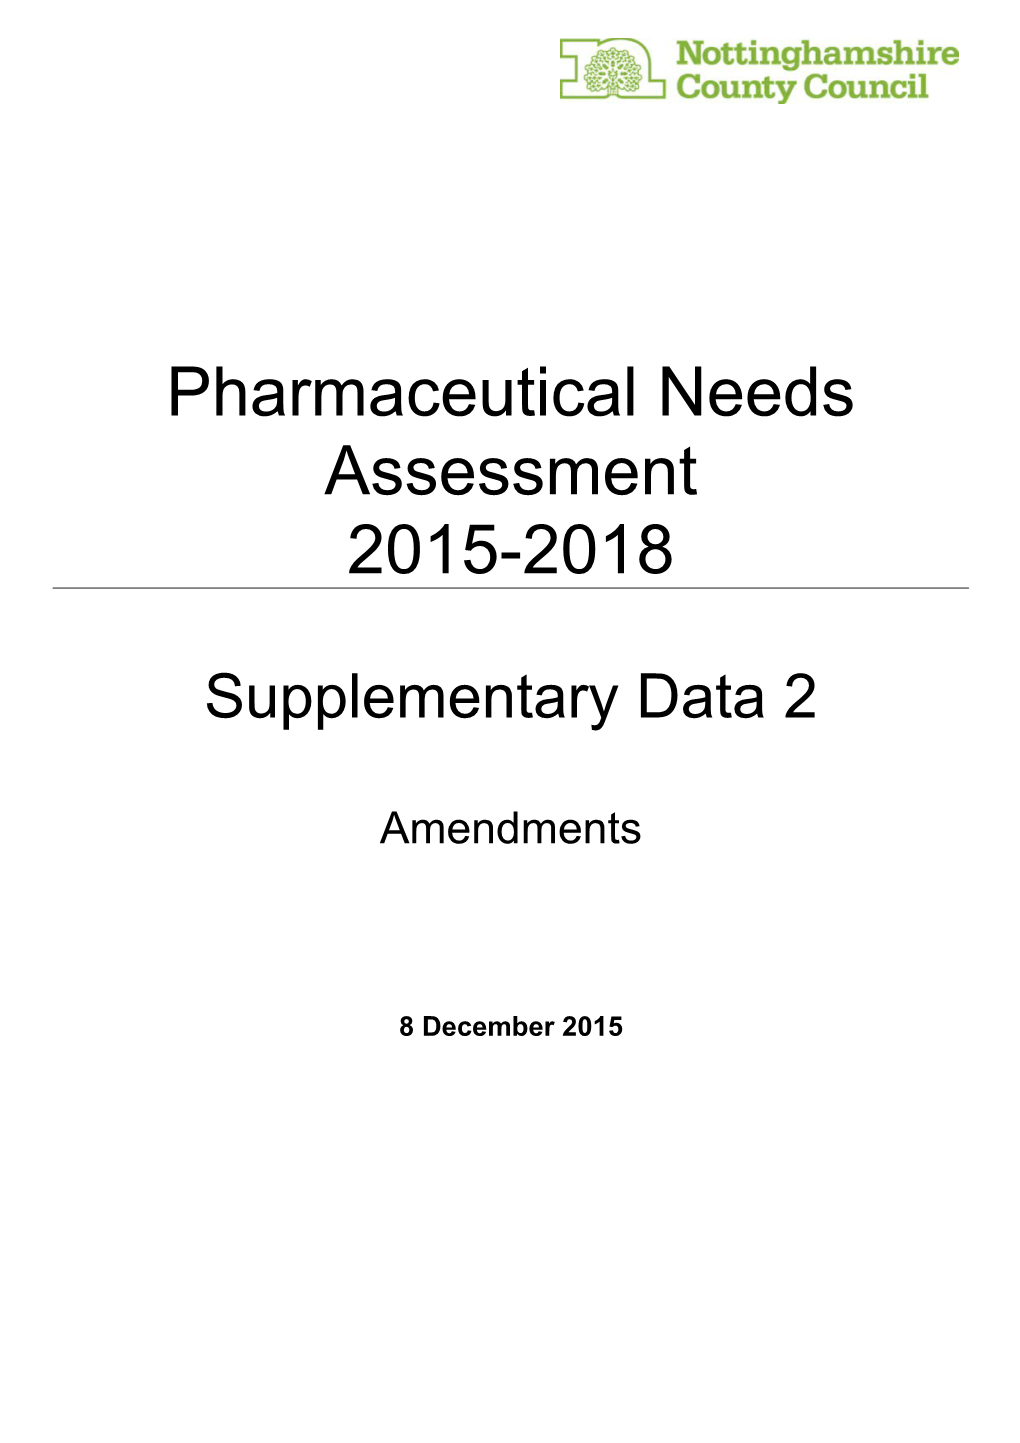 Amendments to the Pharmaceutical Needs Assessment